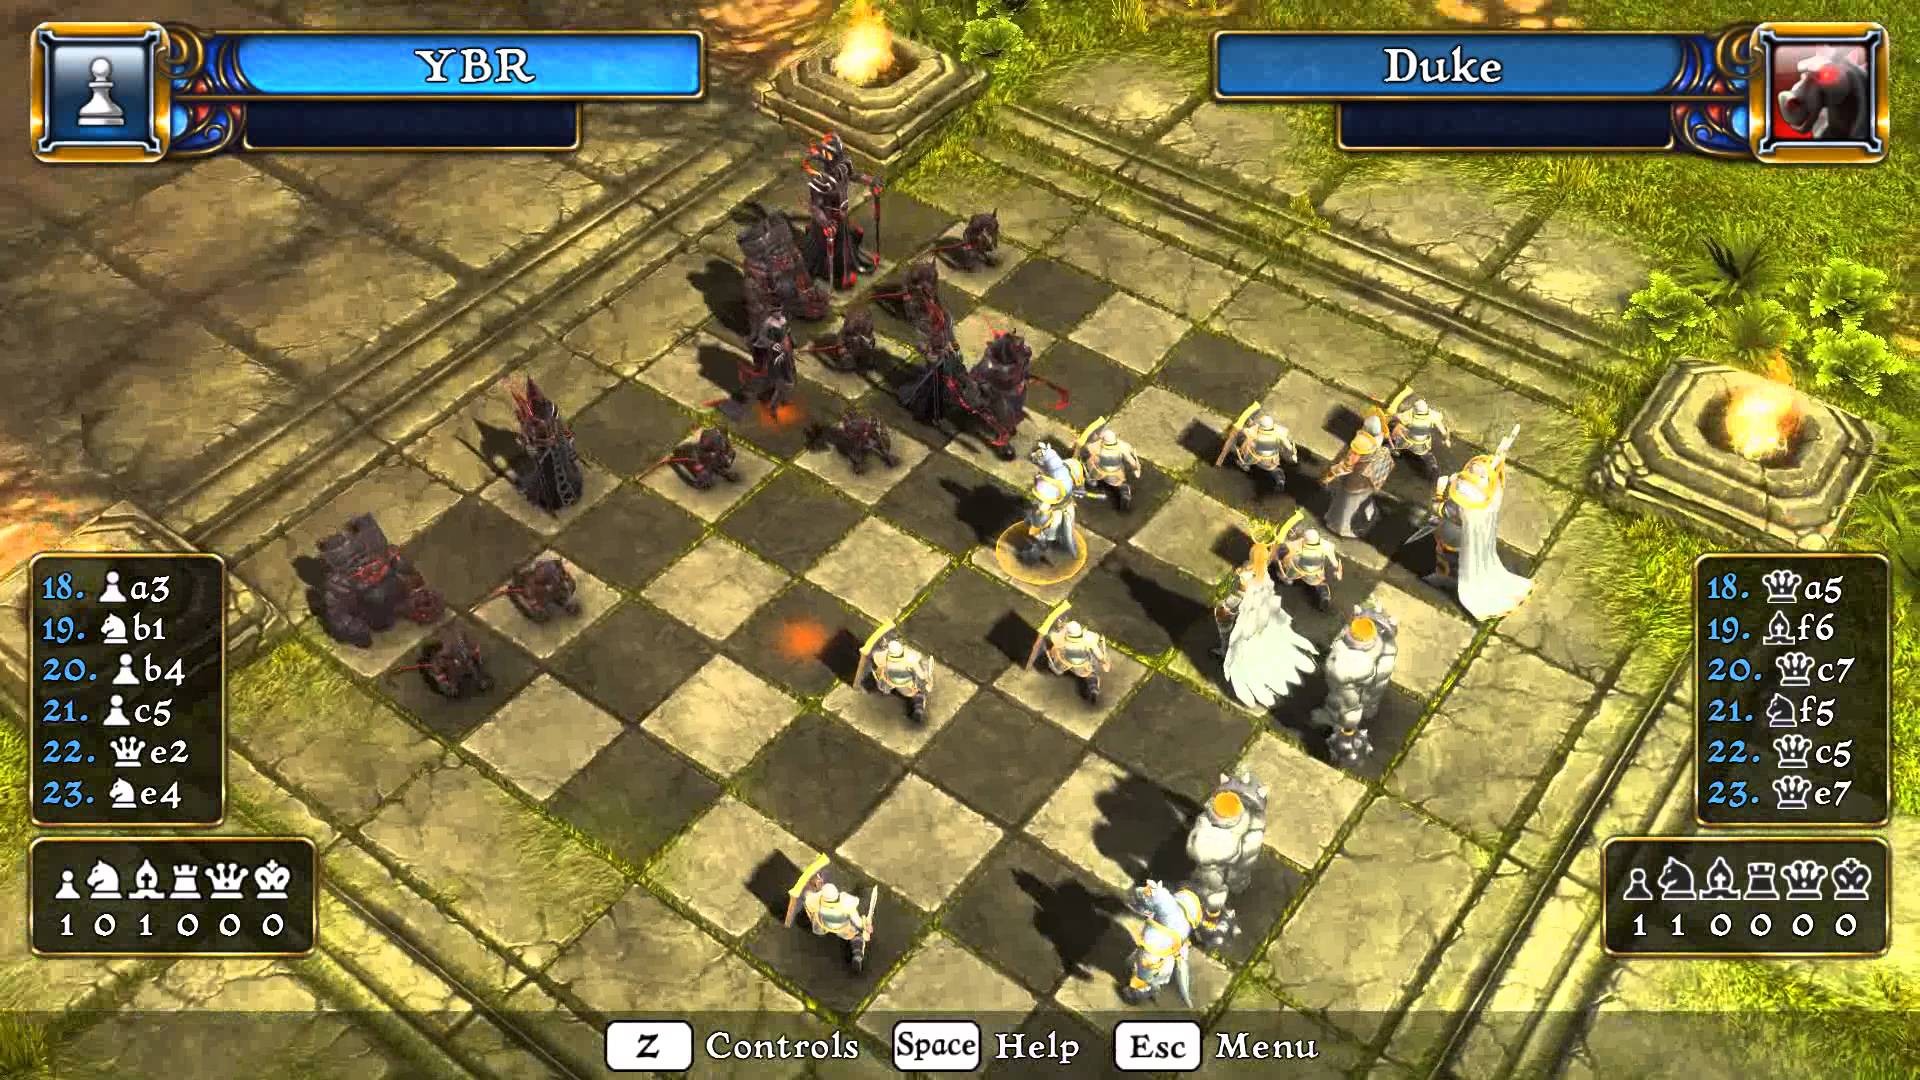 Battle vs. Chess News and Videos